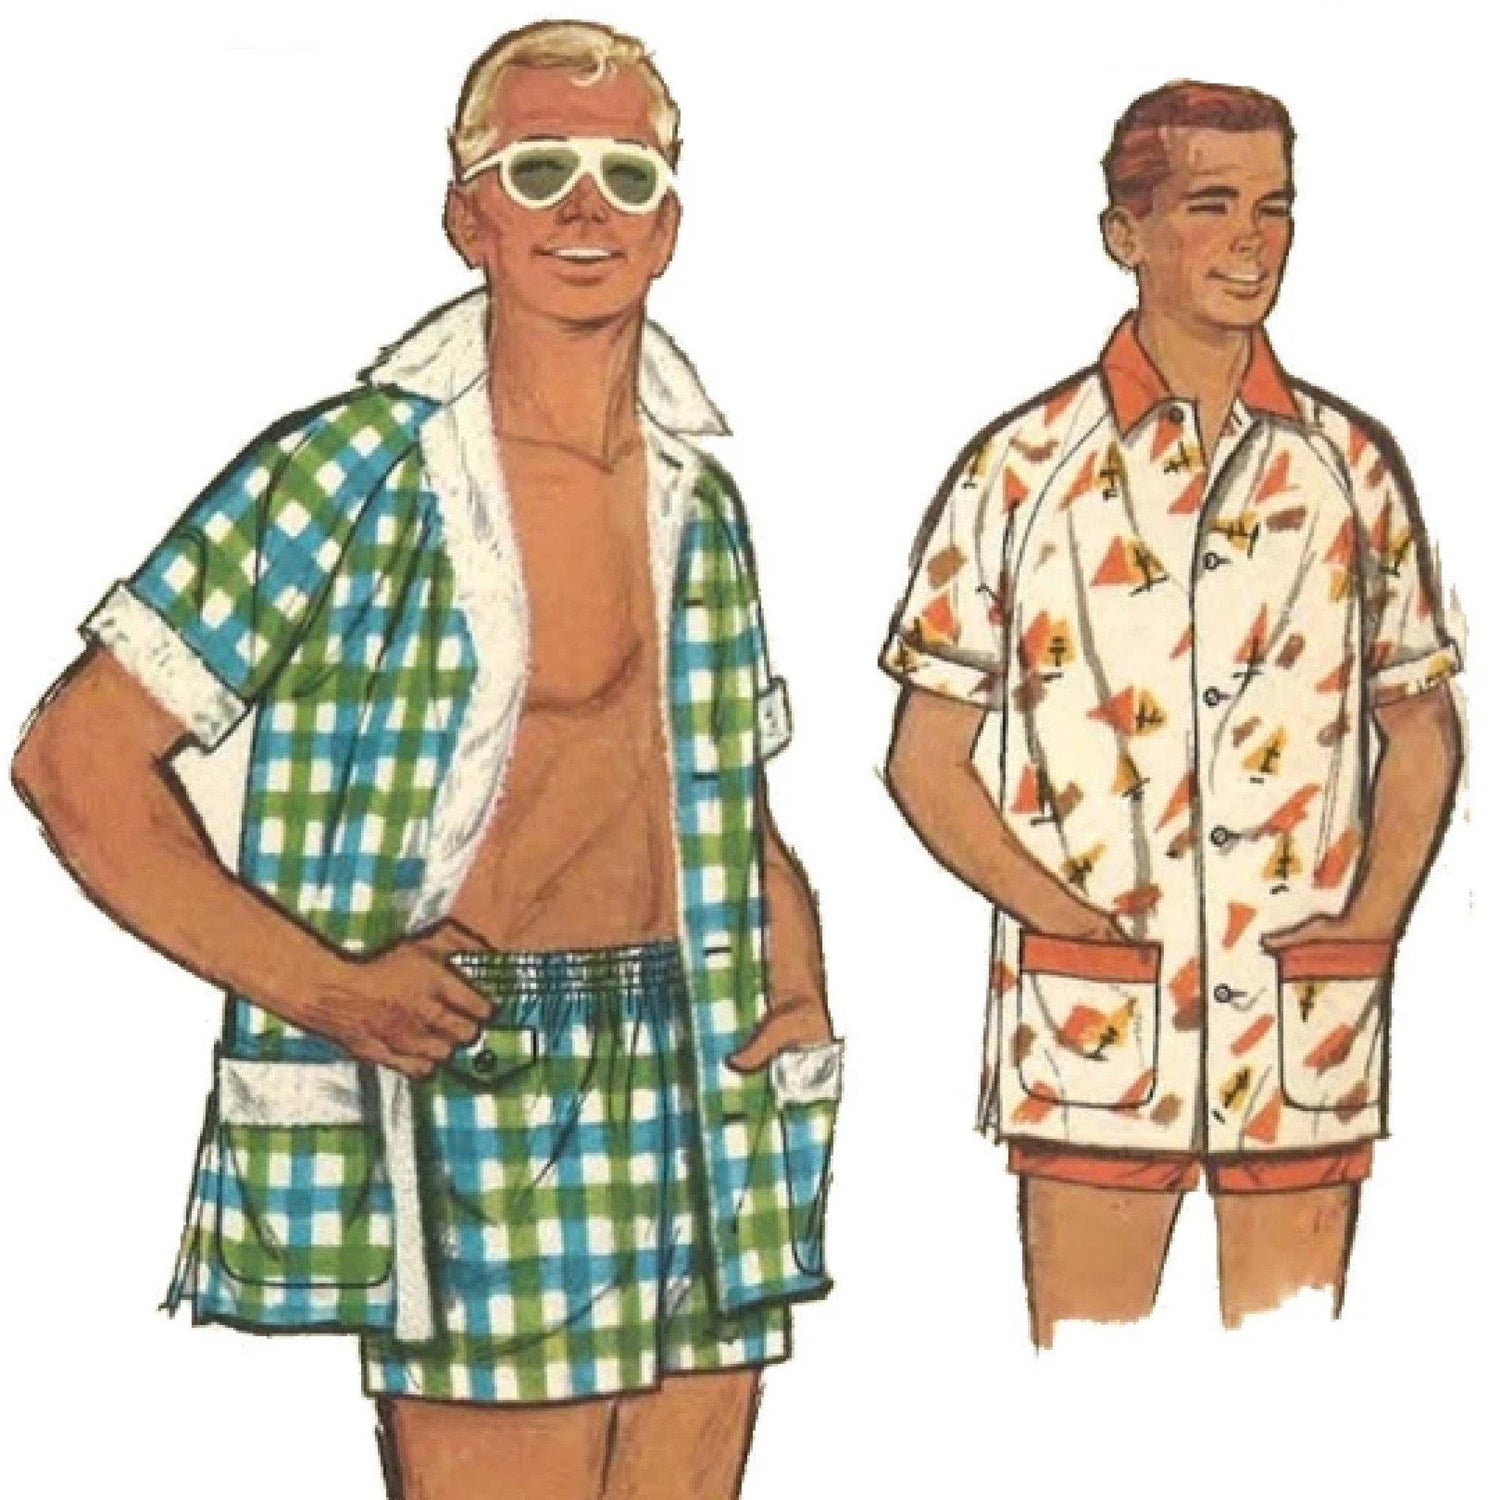 Models wearing beach shorts and shirt made from Simplicity 2080 sewing pattern.